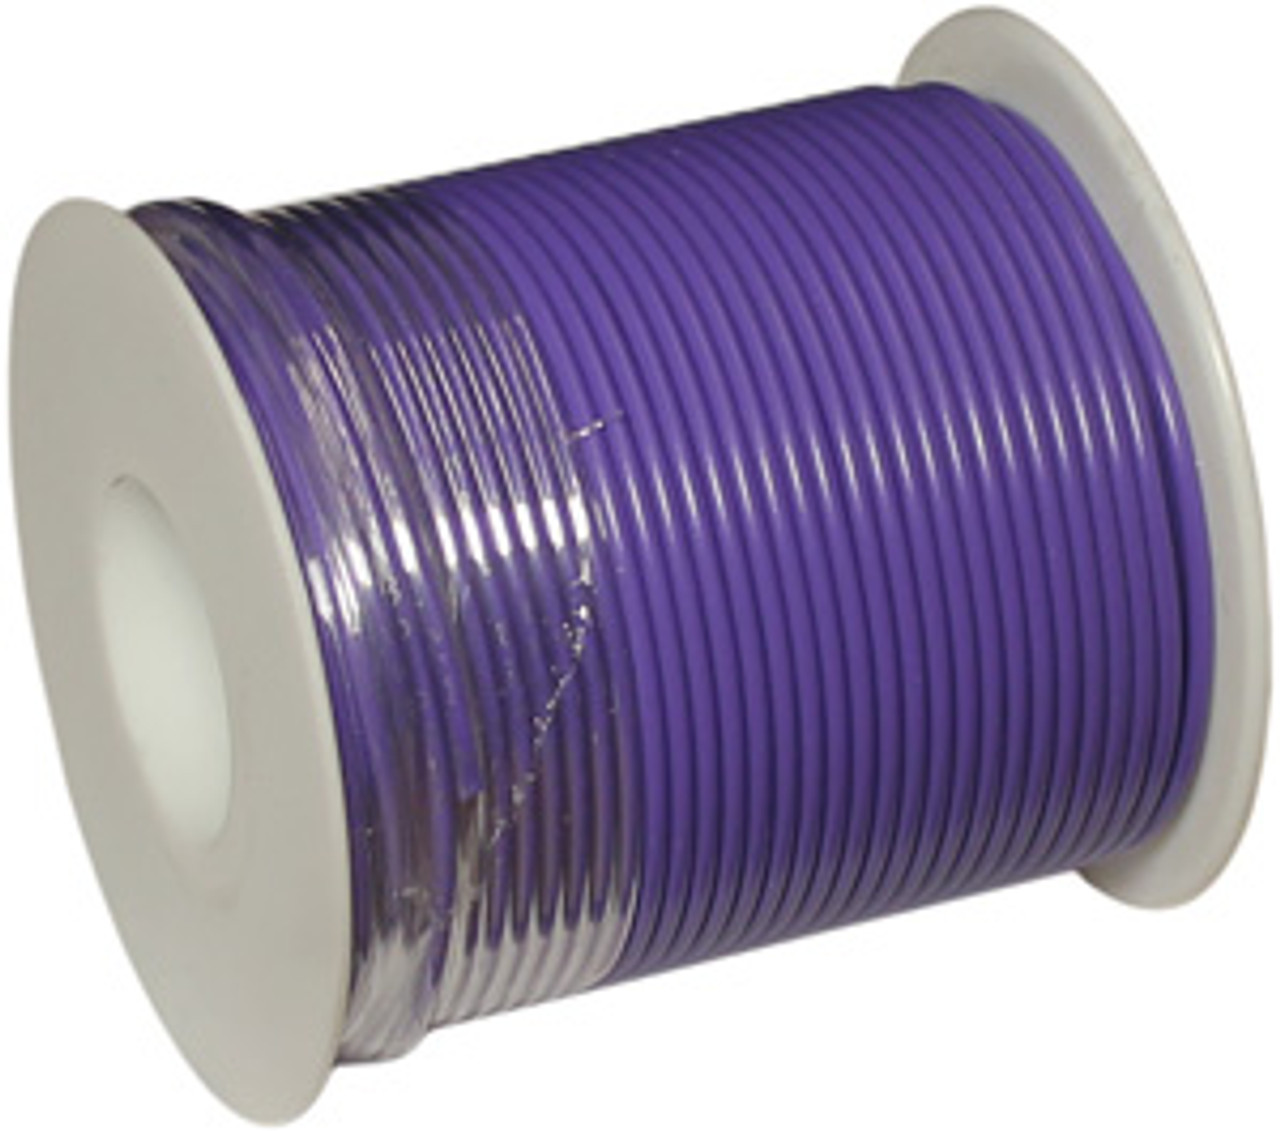 24 AWG @ 25' Purple Primary / Hook Up Wire  8824-9-PK